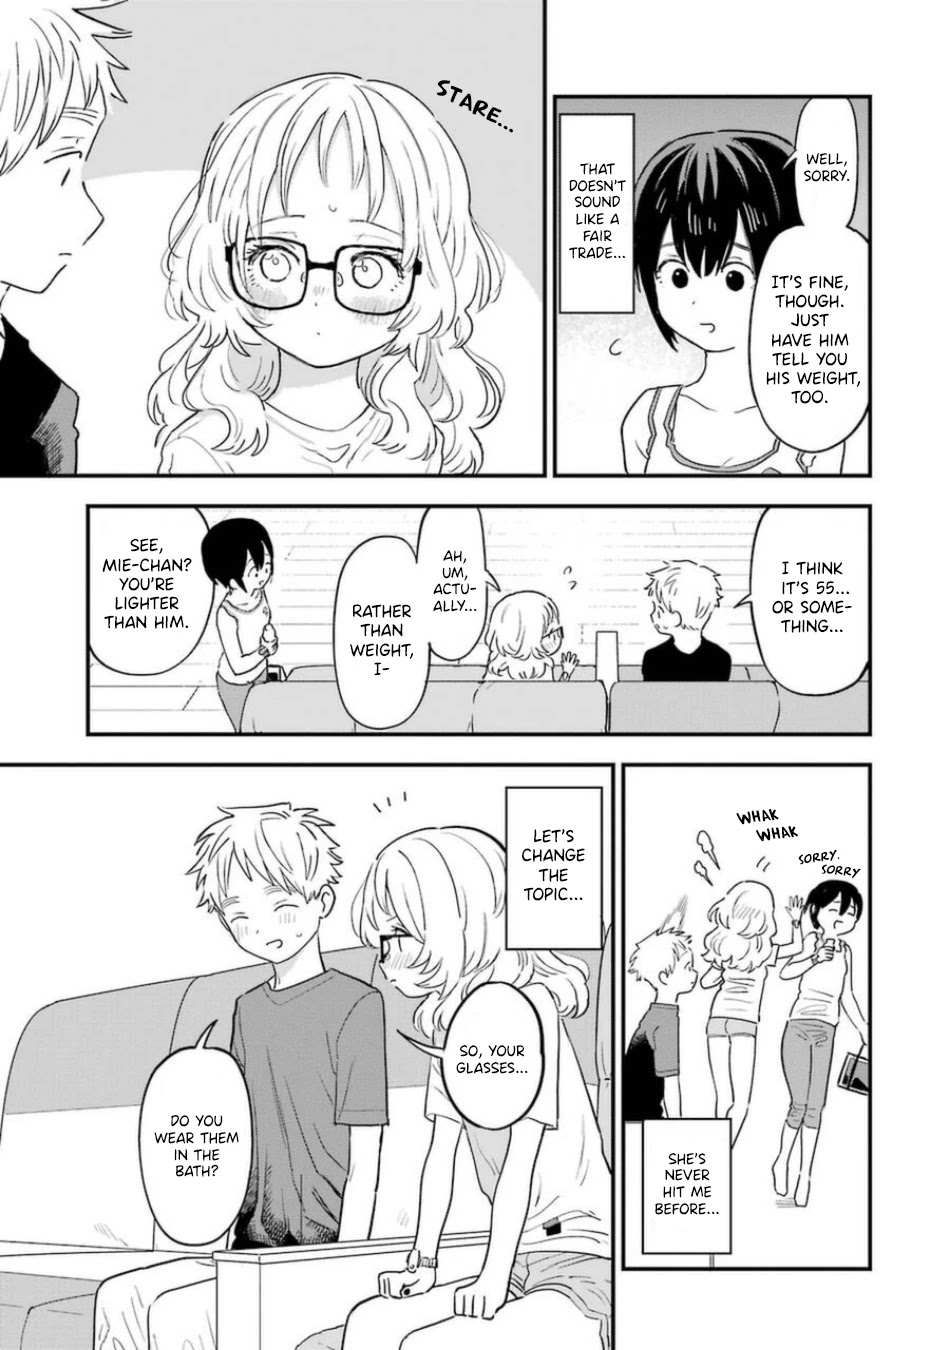 The Girl I Like Forgot Her Glasses chapter 75 page 13